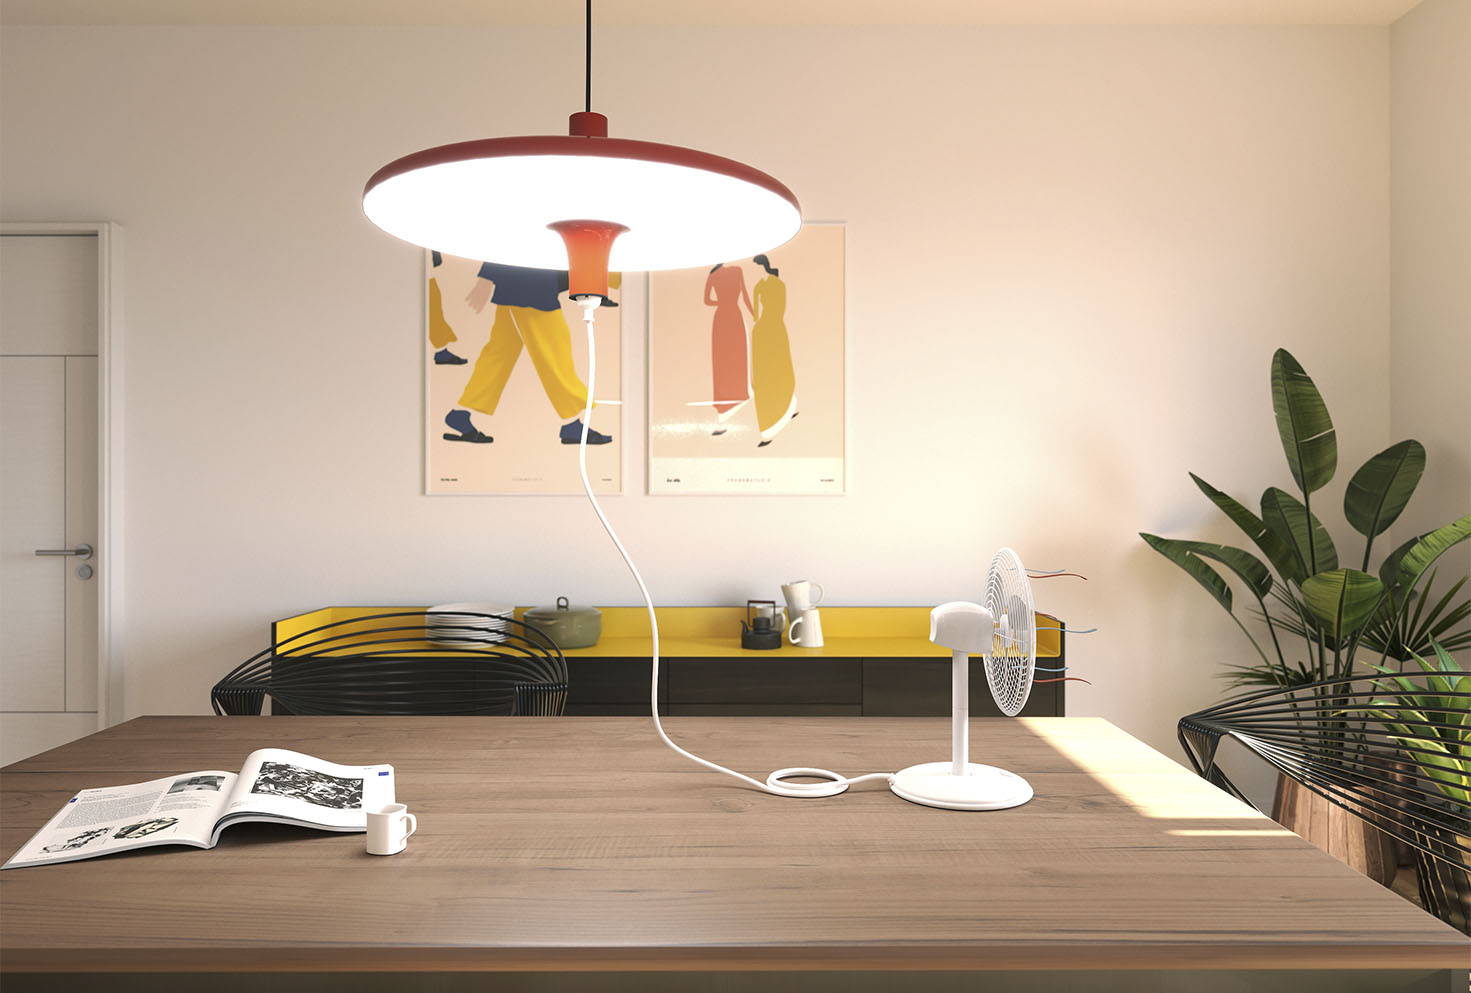 Martinelli Luce - Design Lamps and Lighting Systems